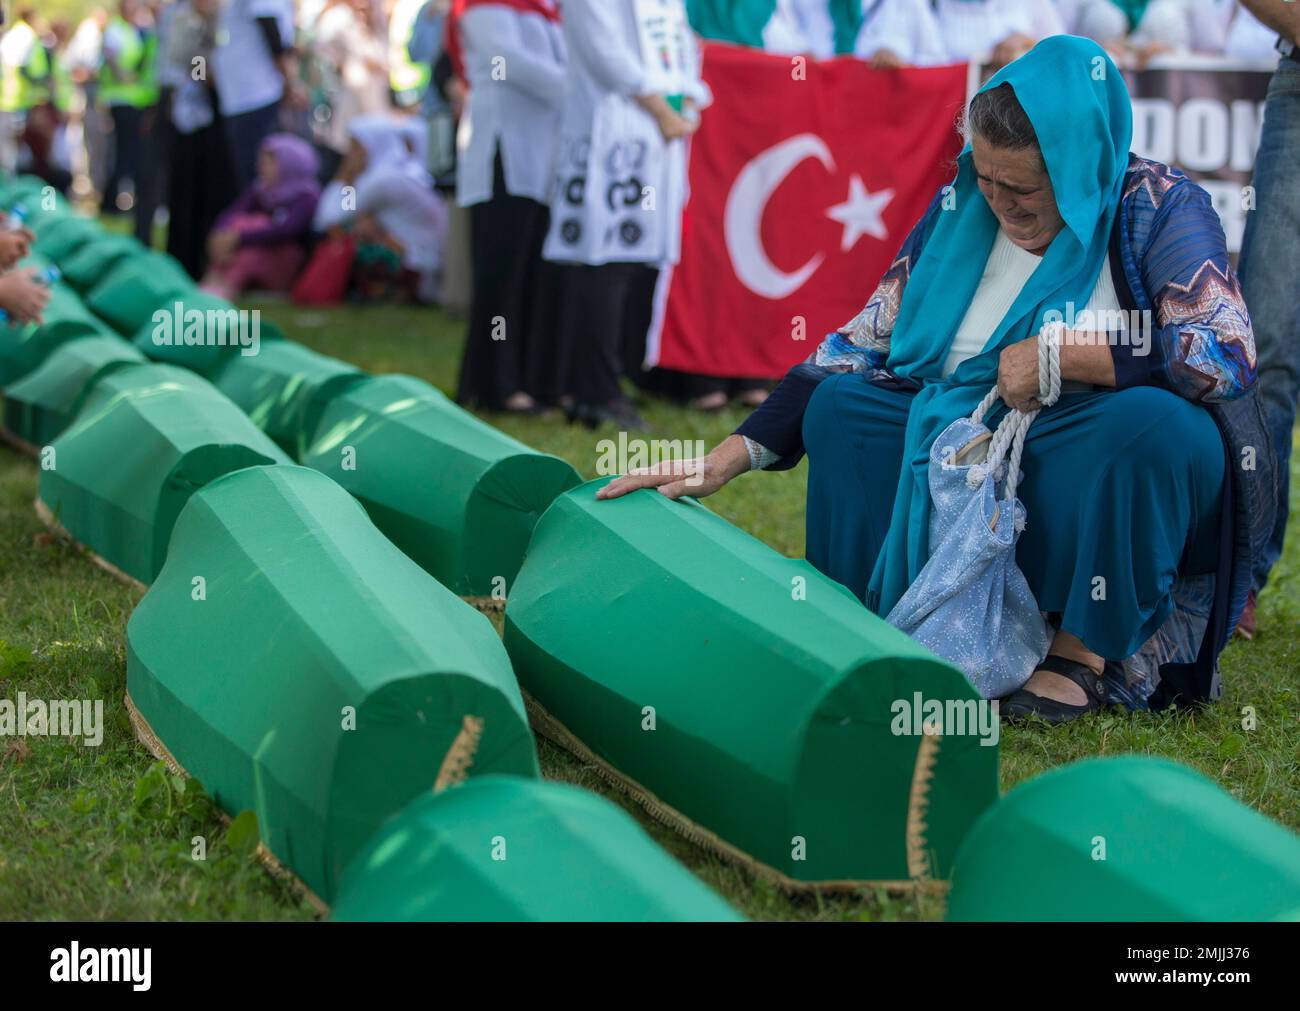 A woman mourns next to the coffins in Potocari near Srebrenica, Bosnia, Thursday, July 11, 2019. The remains of the 33 victims of Srebrenica massacre will be buried 24 years after Serb troops overran the eastern Bosnian Muslim enclave of Srebrenica and executed some 8,000 Muslim men and boys, which international courts have labeled as an act of genocide. (AP Photo/Darko Bandic) Banque D'Images